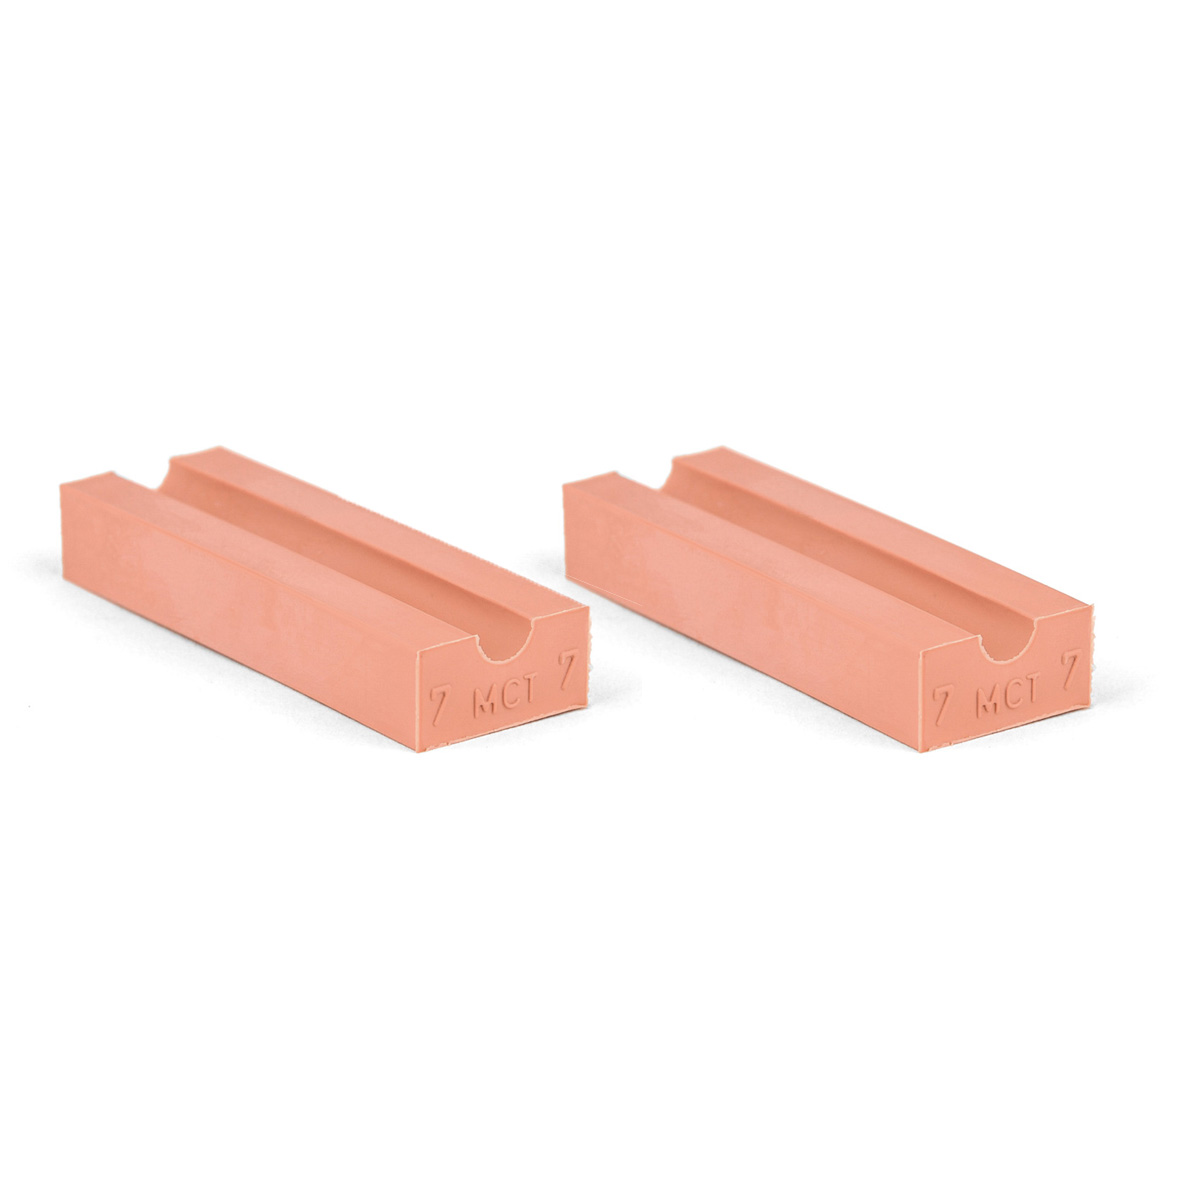 20-07*2 Set of 2 half insert block lycron, 20-07 for cable/pipe diam. 6.5-7.5mm